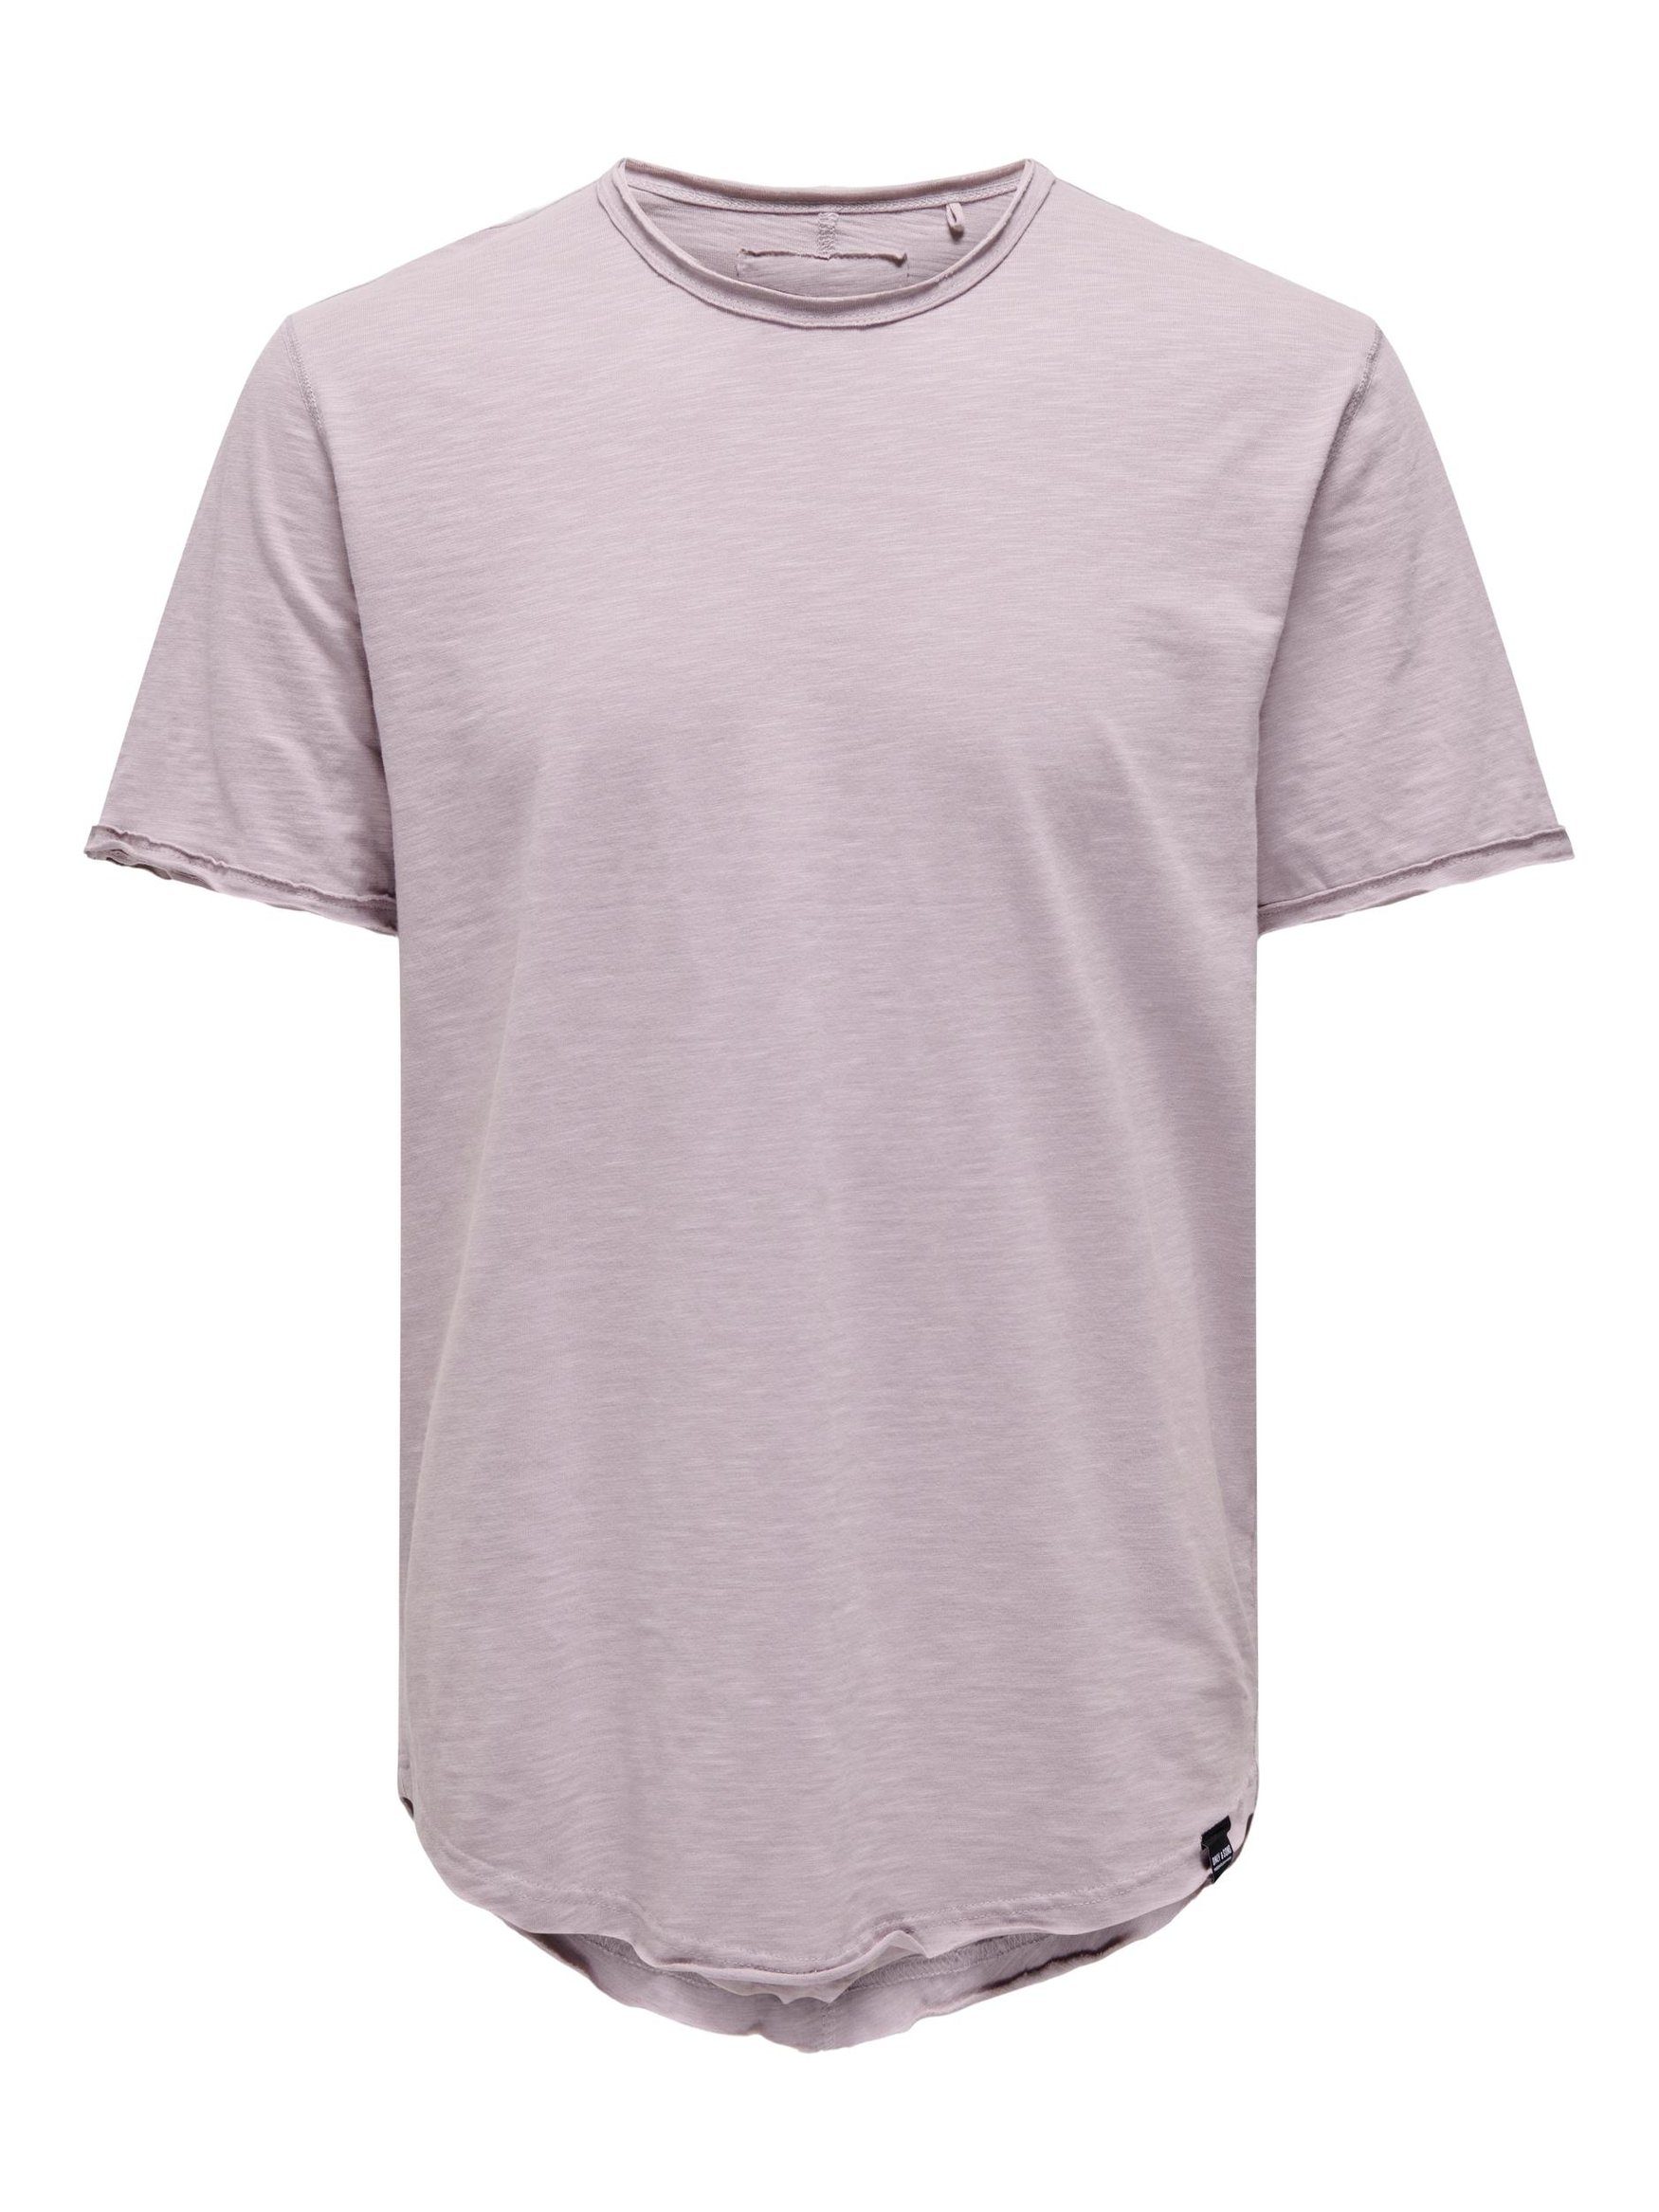 ONLY & SONS T-Shirt Langes Rundhals T-Shirt Einfarbiges Kurzarm Basic Shirt ONSBENNE 4783 in Rosa